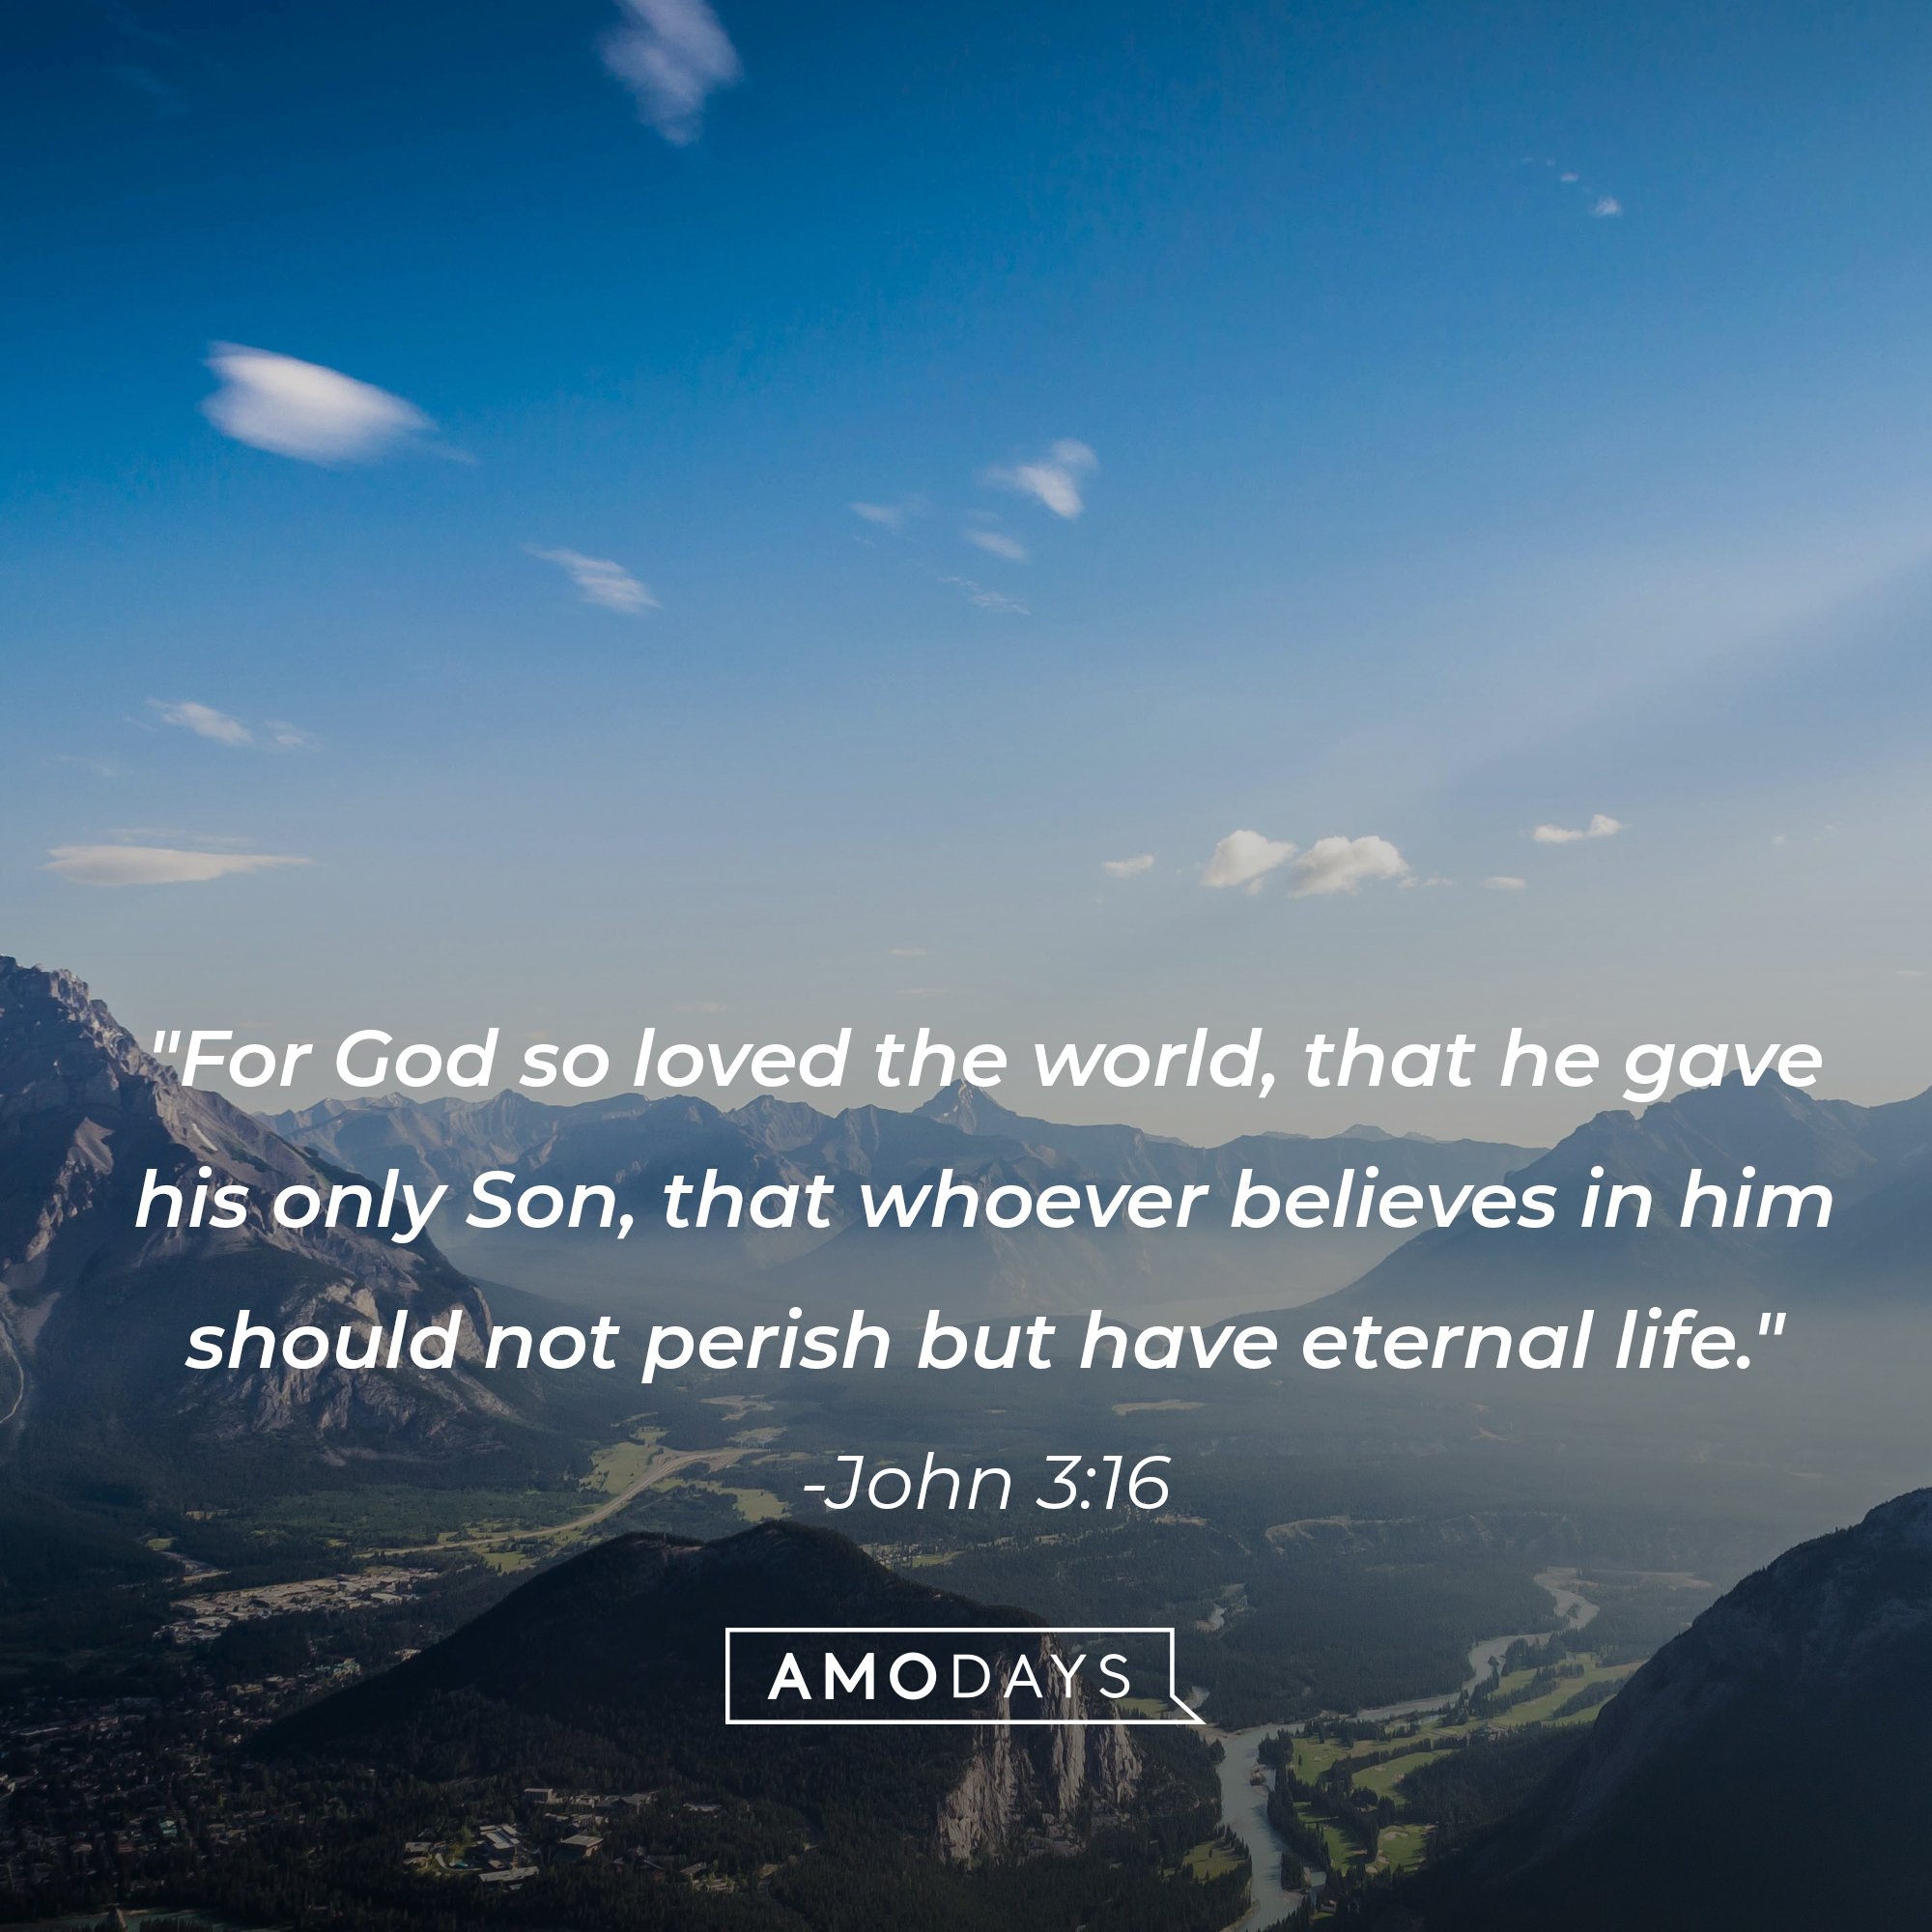 Quotes from the Bible John 3:16: "For God so loved the world, that he gave his only Son, that whoever believes in him should not perish but have eternal life." | Image: AmoDays 